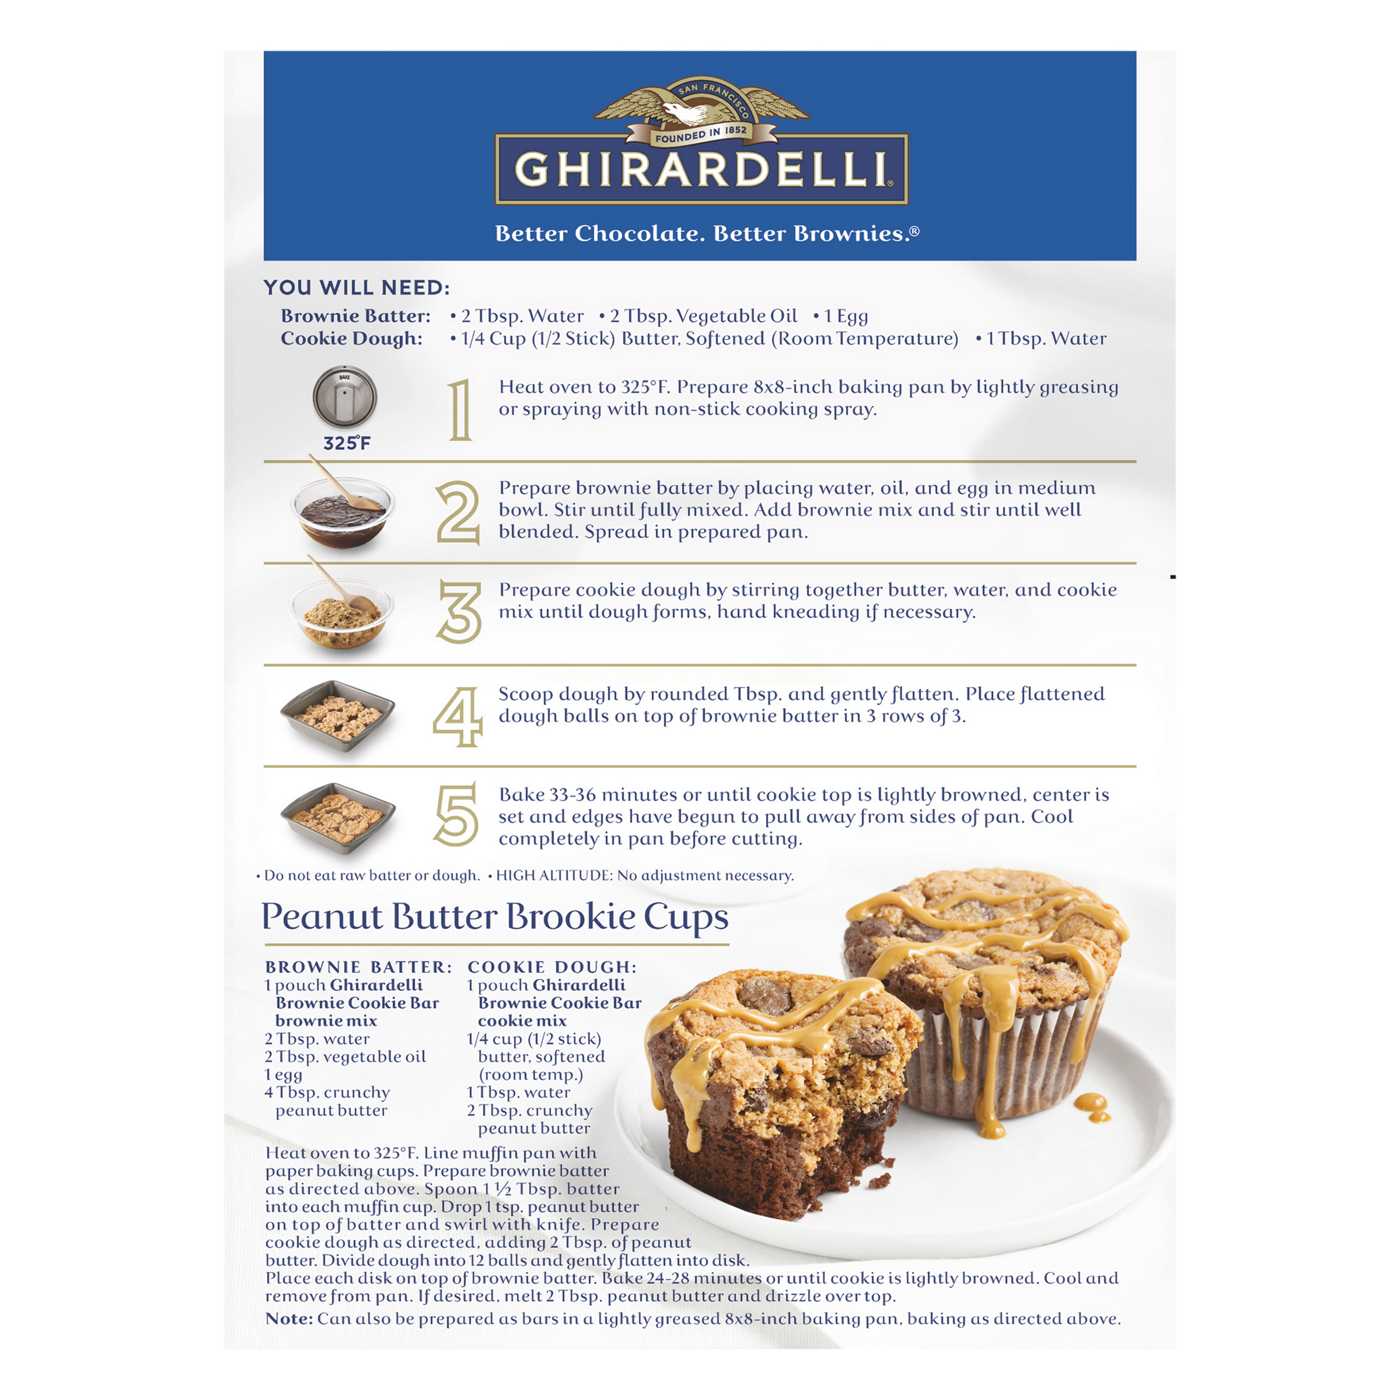 Ghirardelli Brownie Cookie Bar Mix; image 2 of 2